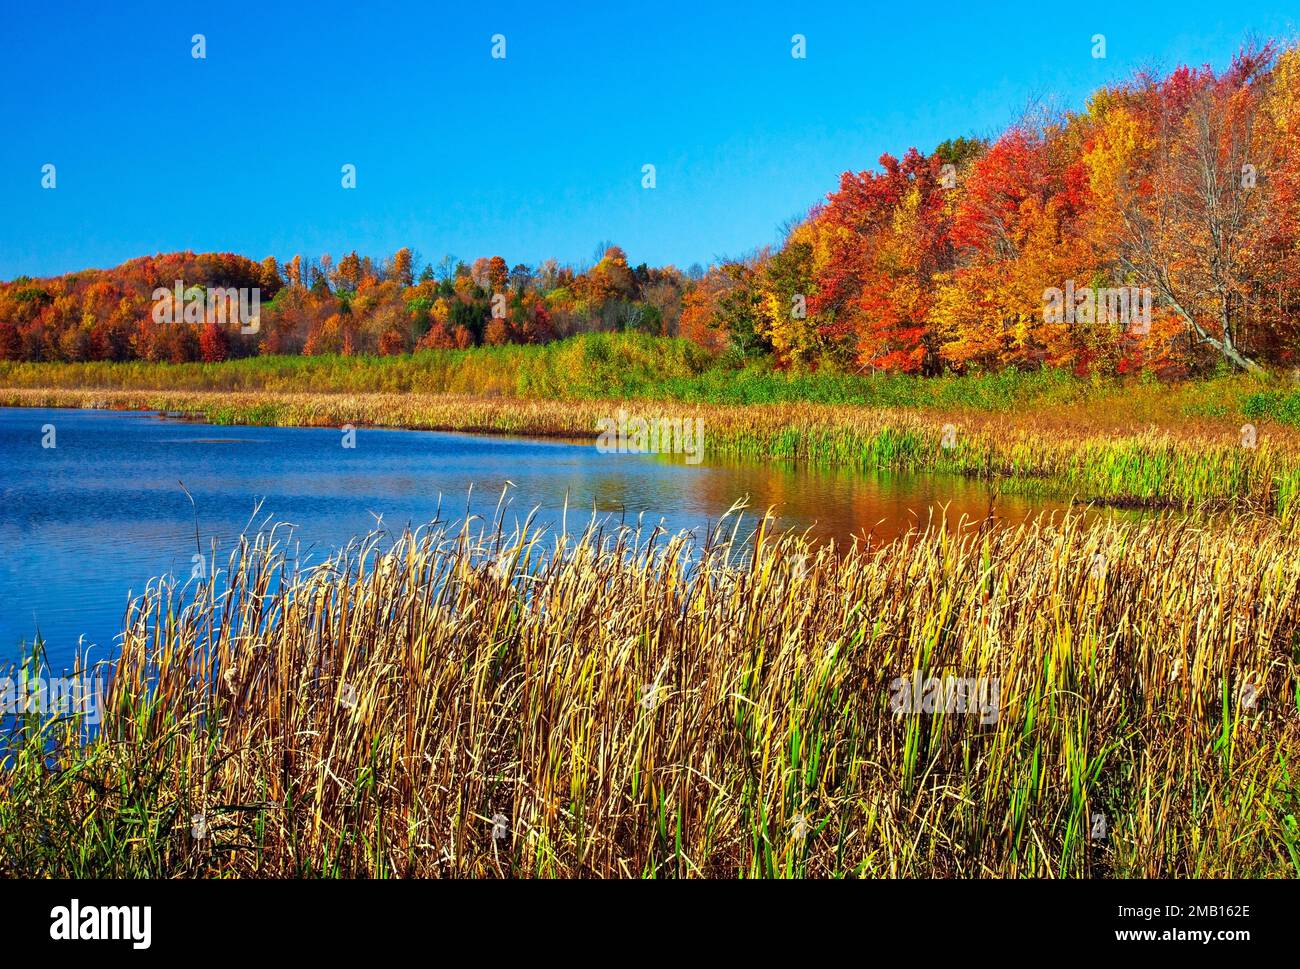 White Oak Pond is parly a natural and man-made lake in Wayne County, Pennsylvania and owned by the Pennsylvania Fish & Boat Commission for outdoor rec Stock Photo